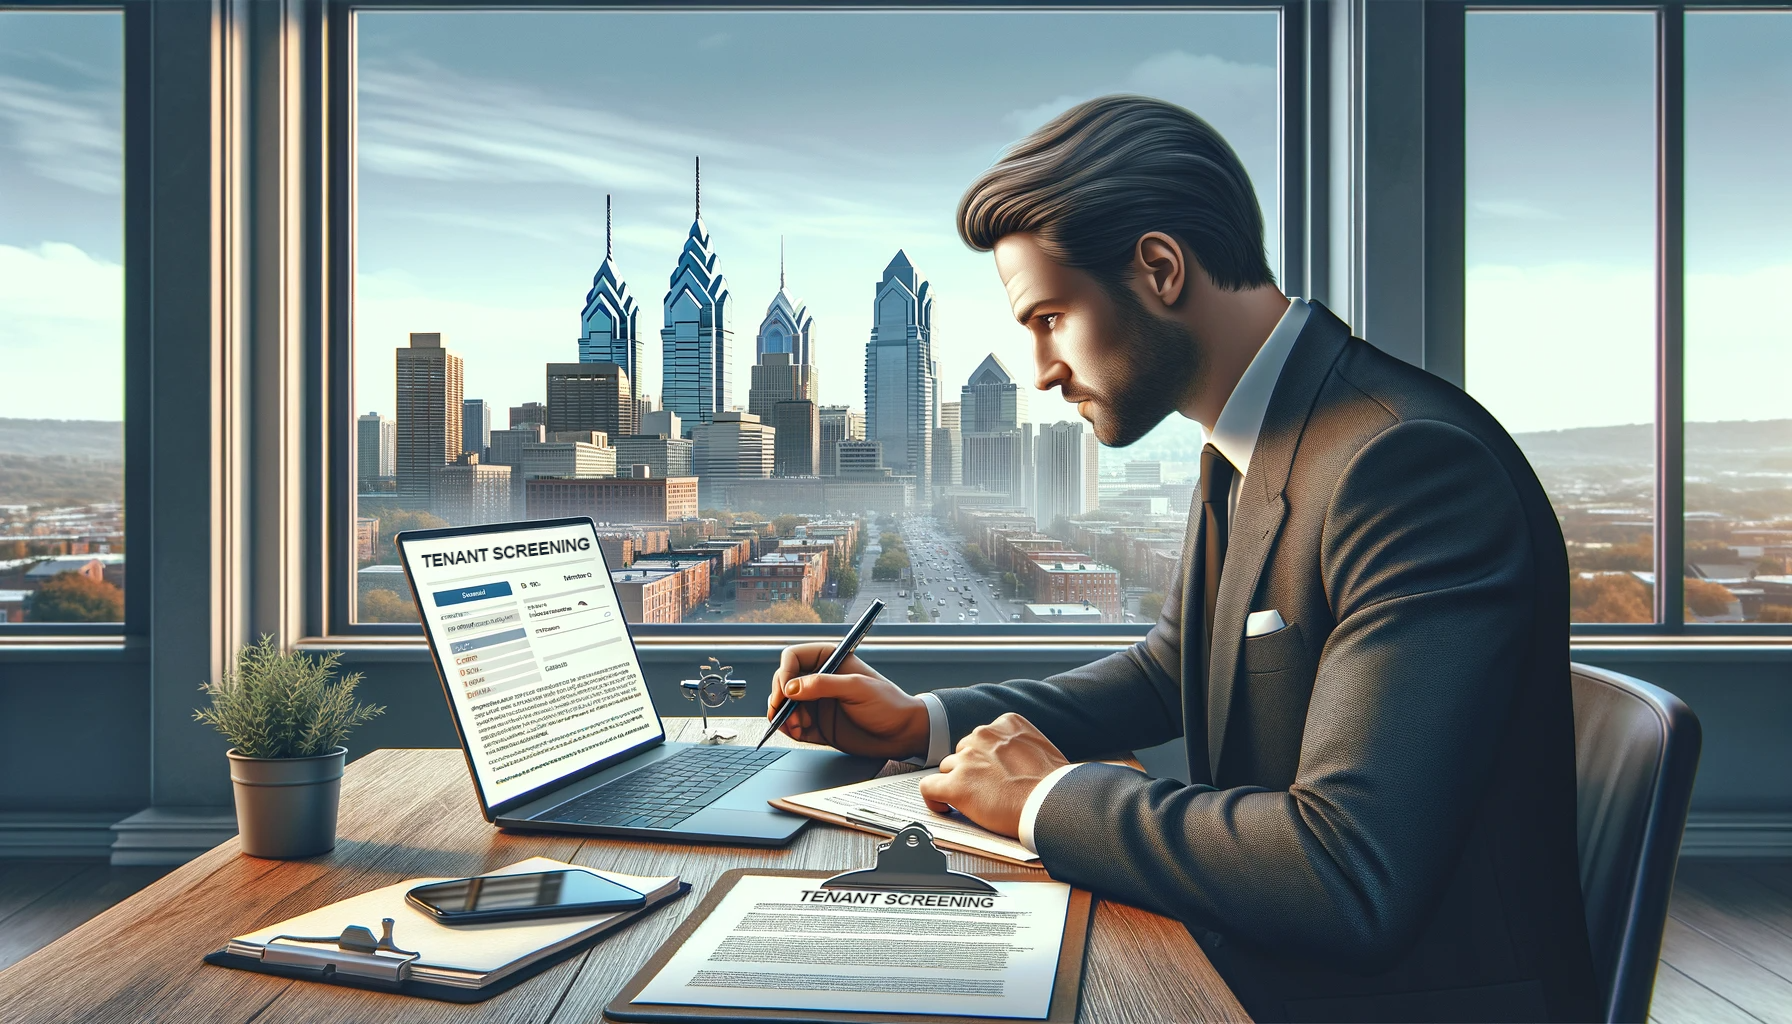 Businessman performing tenant screening in a highrise office overlooking the Philadelphia skyline.